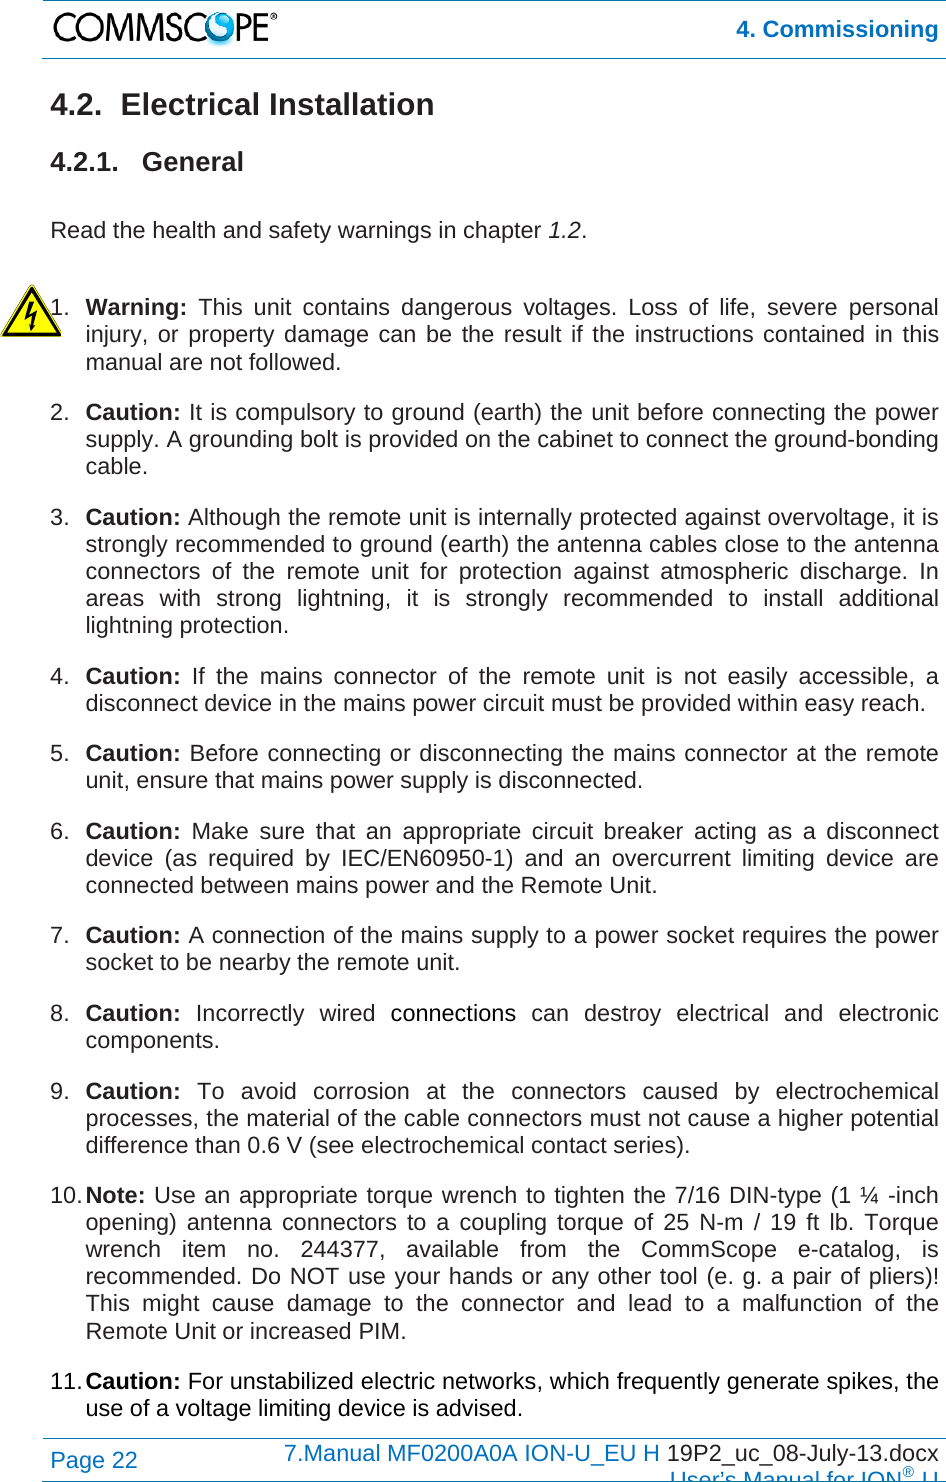  4. Commissioning Page 22  7.Manual MF0200A0A ION-U_EU H 19P2_uc_08-July-13.docx  User’s Manual for ION®U 4.2. Electrical Installation 4.2.1. General  Read the health and safety warnings in chapter 1.2.  1.  Warning:  This unit contains dangerous voltages. Loss of life, severe personal injury, or property damage can be the result if the instructions contained in this manual are not followed. 2.  Caution: It is compulsory to ground (earth) the unit before connecting the power supply. A grounding bolt is provided on the cabinet to connect the ground-bonding cable. 3.  Caution: Although the remote unit is internally protected against overvoltage, it is strongly recommended to ground (earth) the antenna cables close to the antenna connectors of the remote unit for protection against atmospheric discharge. In areas with strong lightning, it is strongly recommended to install additional lightning protection. 4.  Caution:  If the mains connector of the remote unit is not easily accessible, a disconnect device in the mains power circuit must be provided within easy reach. 5.  Caution: Before connecting or disconnecting the mains connector at the remote unit, ensure that mains power supply is disconnected. 6.  Caution: Make sure that an appropriate circuit breaker acting as a disconnect device (as required by IEC/EN60950-1) and an overcurrent limiting device are connected between mains power and the Remote Unit. 7.  Caution: A connection of the mains supply to a power socket requires the power socket to be nearby the remote unit. 8.  Caution: Incorrectly wired connections can destroy electrical and electronic components. 9.  Caution: To avoid corrosion at the connectors caused by electrochemical processes, the material of the cable connectors must not cause a higher potential difference than 0.6 V (see electrochemical contact series). 10. Note: Use an appropriate torque wrench to tighten the 7/16 DIN-type (1 ¼ -inch opening) antenna connectors to a coupling torque of 25 N-m / 19 ft lb. Torque wrench item no. 244377, available from the CommScope e-catalog, is recommended. Do NOT use your hands or any other tool (e. g. a pair of pliers)! This might cause damage to the connector and lead to a malfunction of the Remote Unit or increased PIM. 11. Caution: For unstabilized electric networks, which frequently generate spikes, the use of a voltage limiting device is advised. 